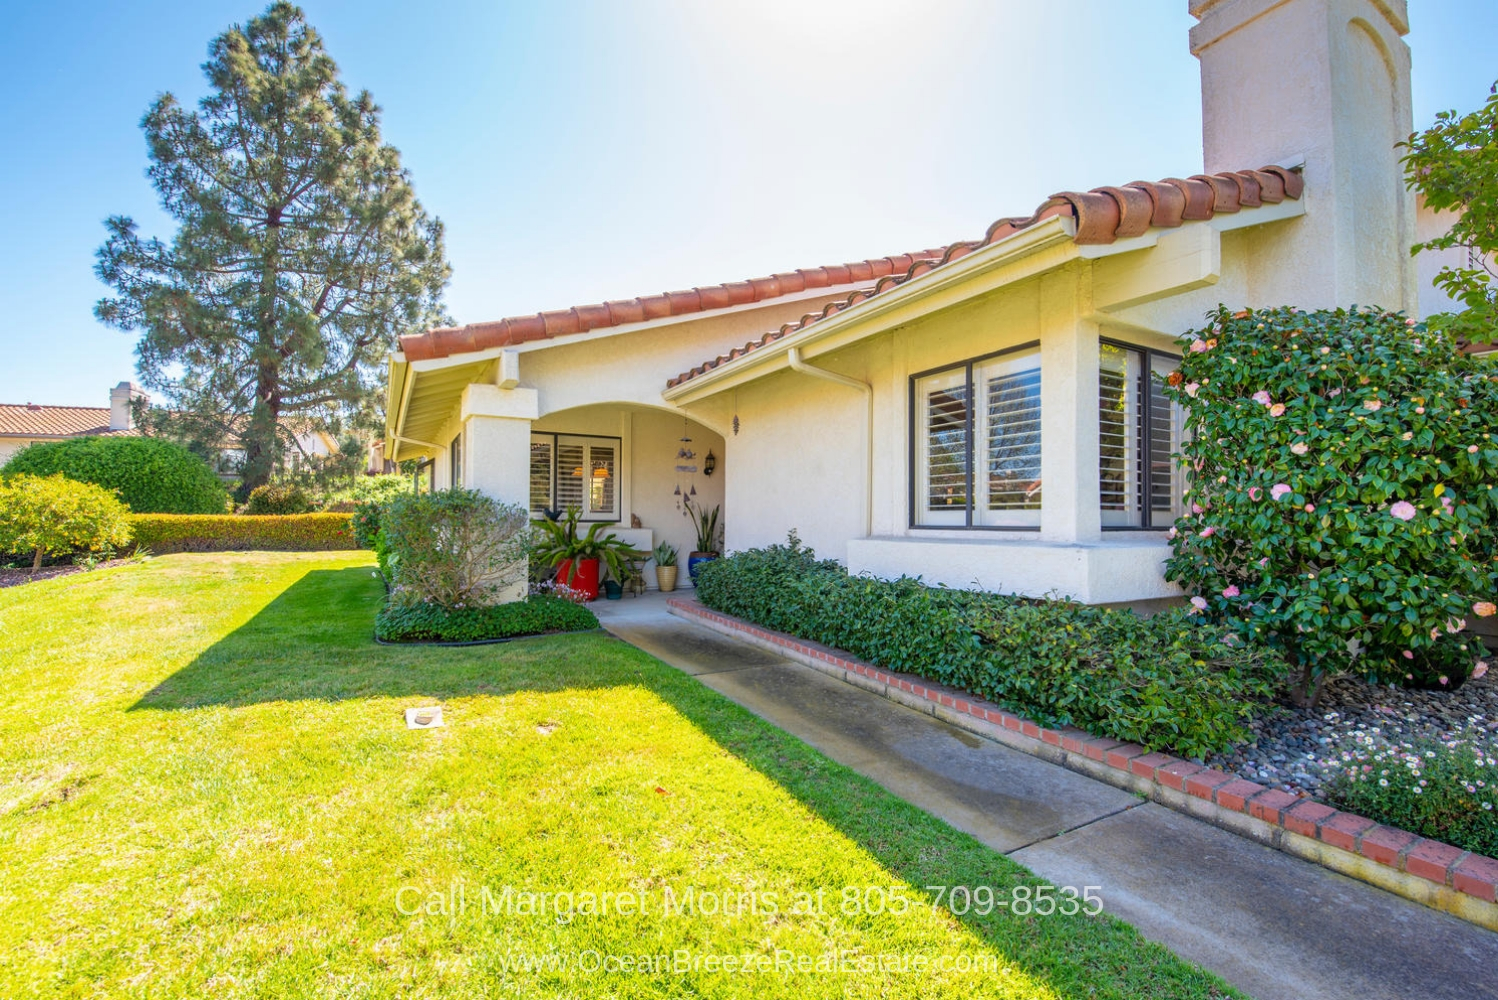 Nipomo CA Golf Homes for Sale -  Enjoy the convenience, privacy, and space offered by this single-level home in the Blacklake golf community. 